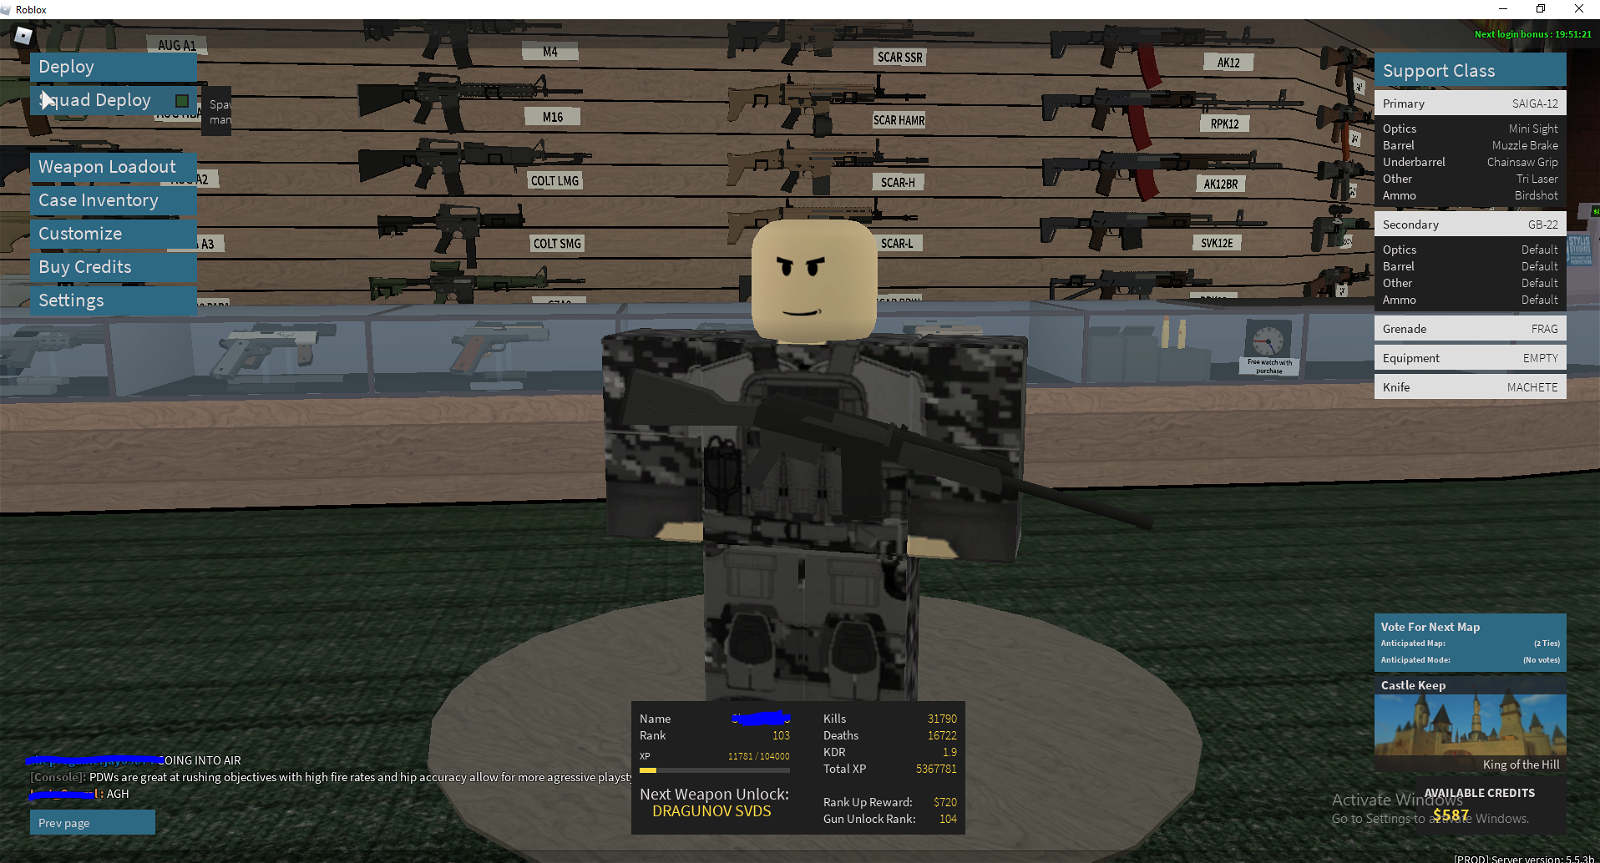 SOLD - Selling High Rank Phantom Forces Account - EpicNPC